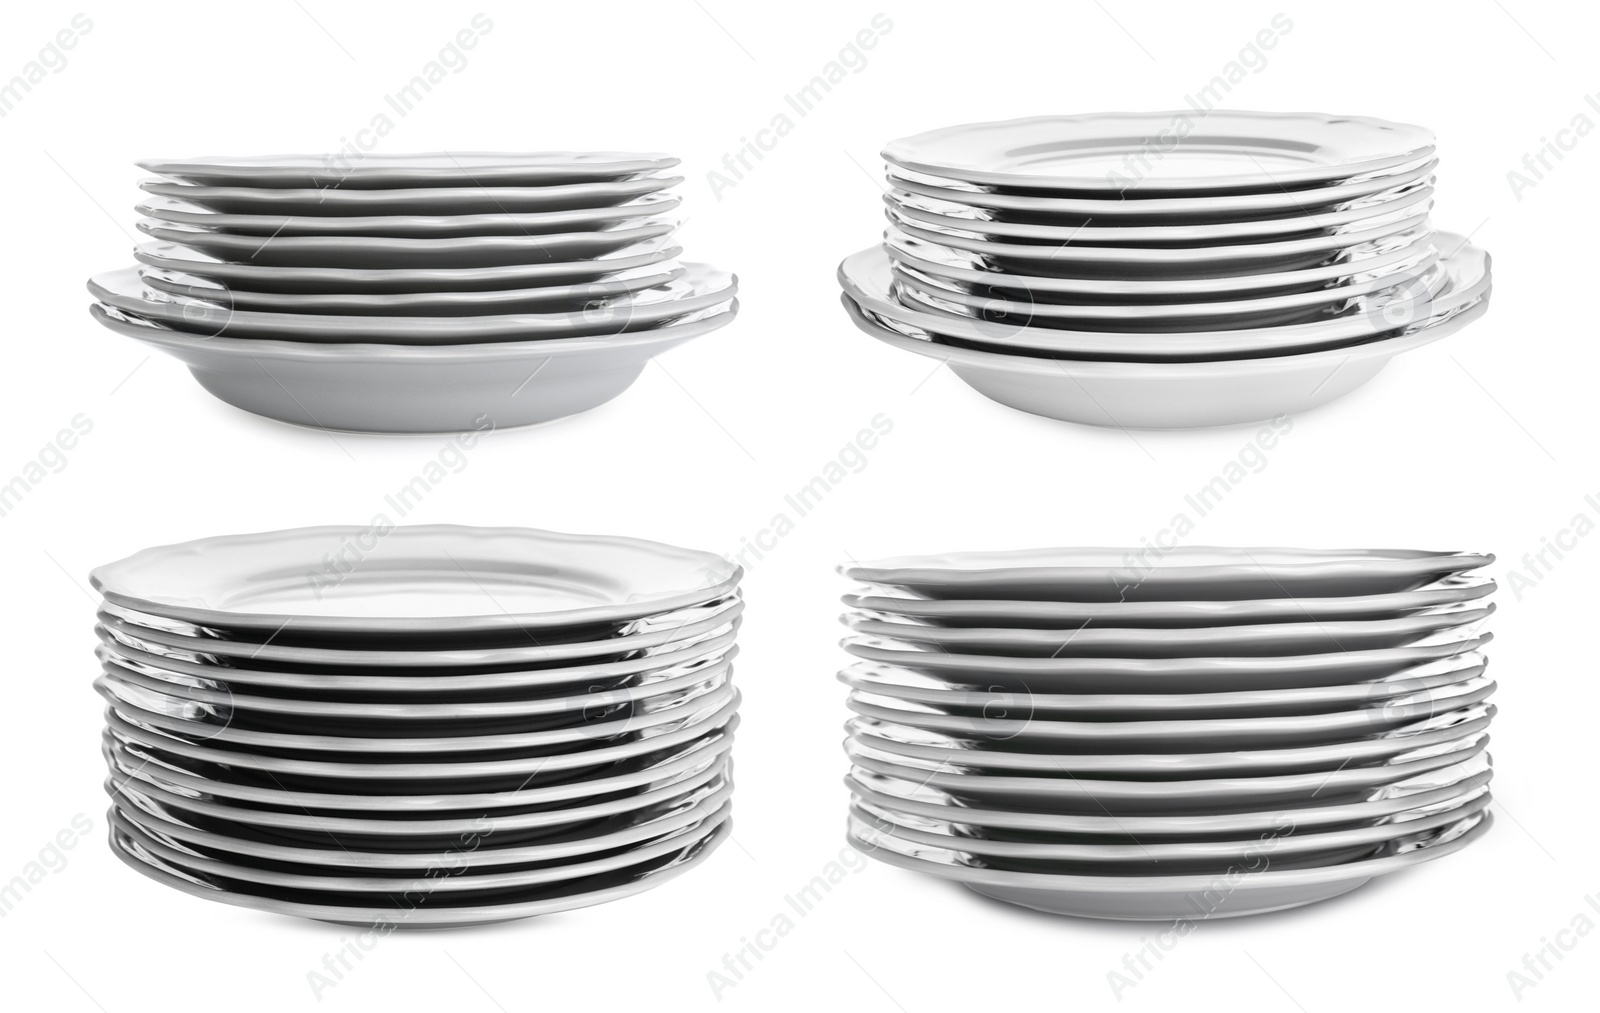 Image of Collage of stacks of ceramic plates on white background